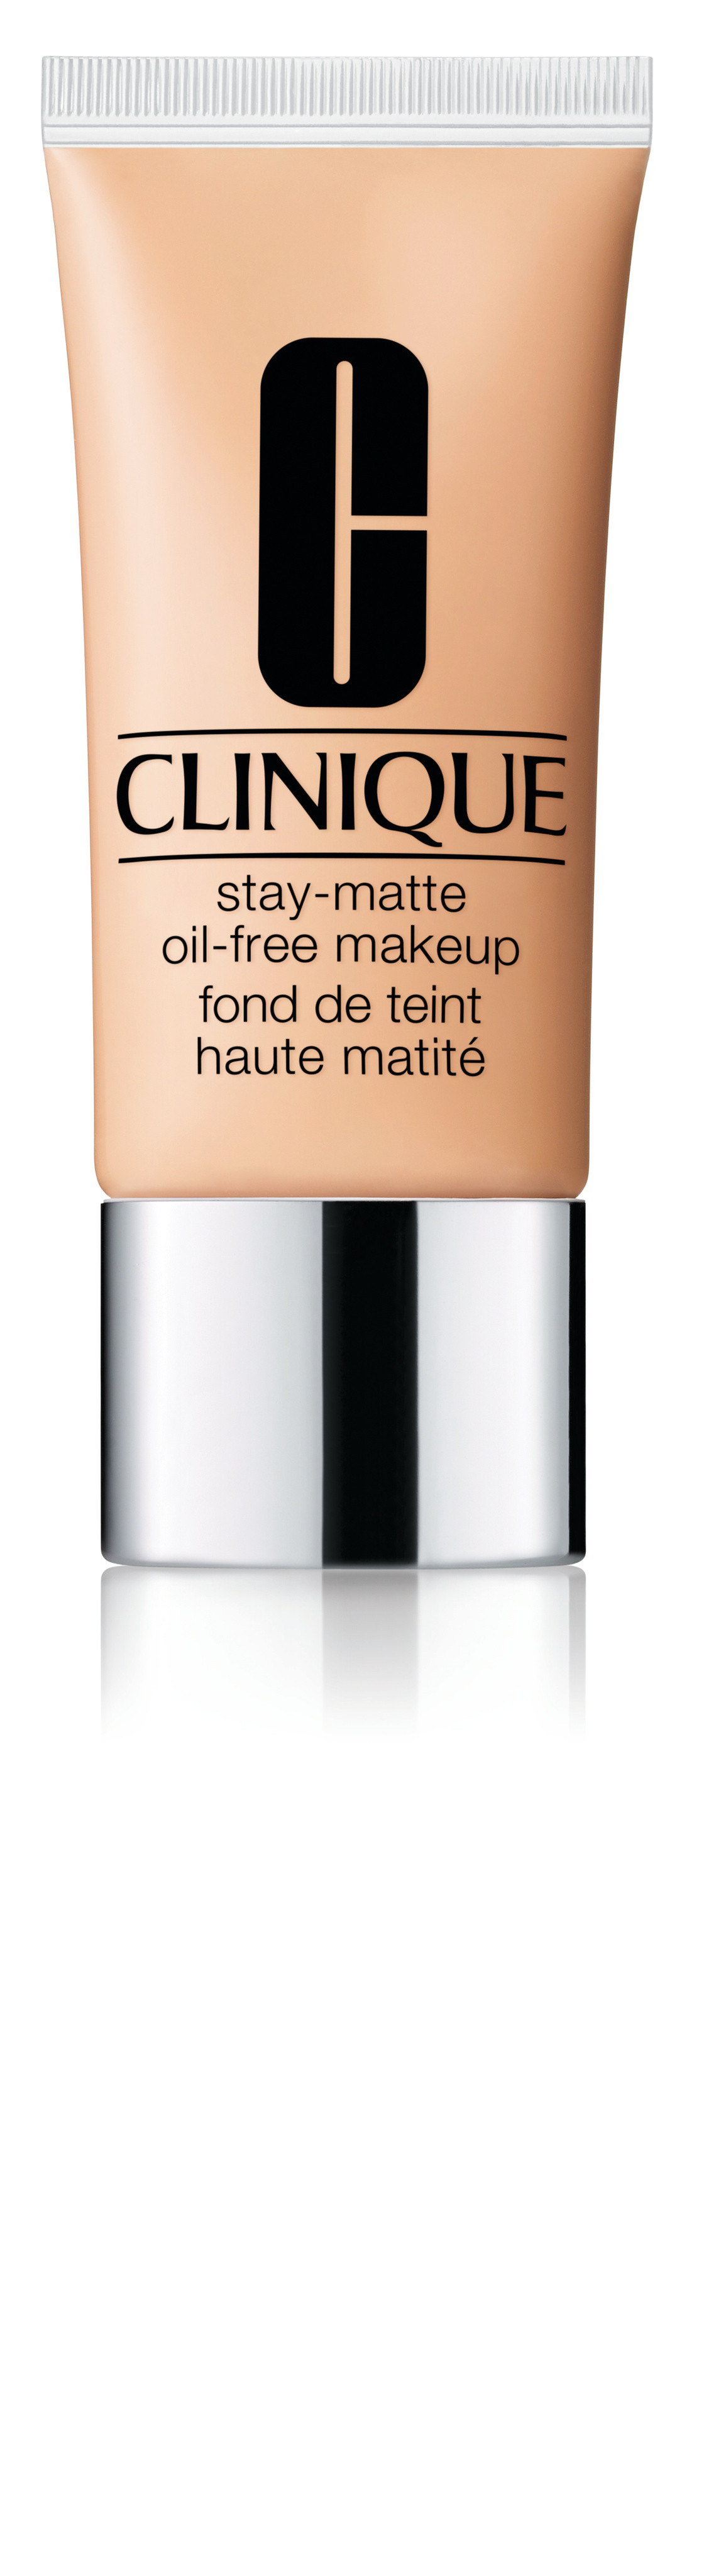 Clinique stay-matte oil-free make-up - 30 ml, CN 52 NEUTRAL, large image number 0